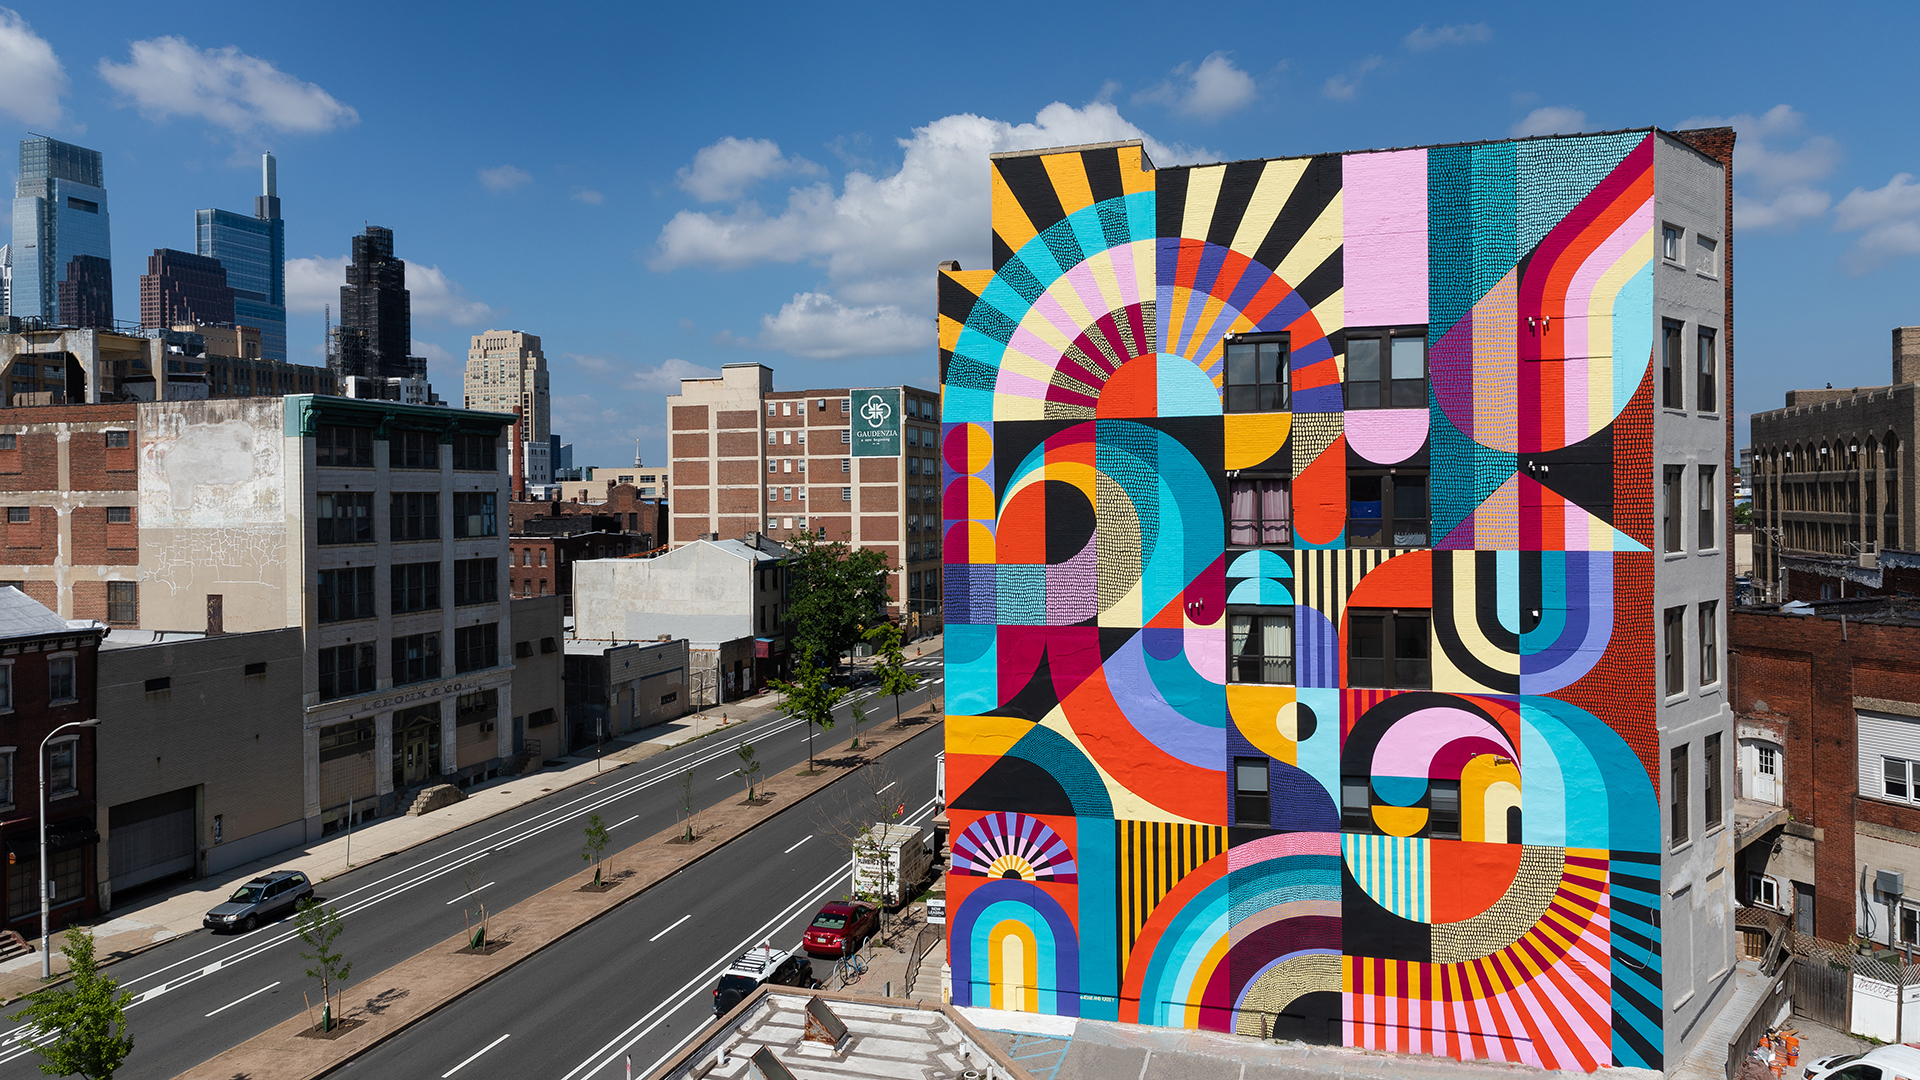 A vibrant mural made up of shapes on the side of a building in Philadelphia.